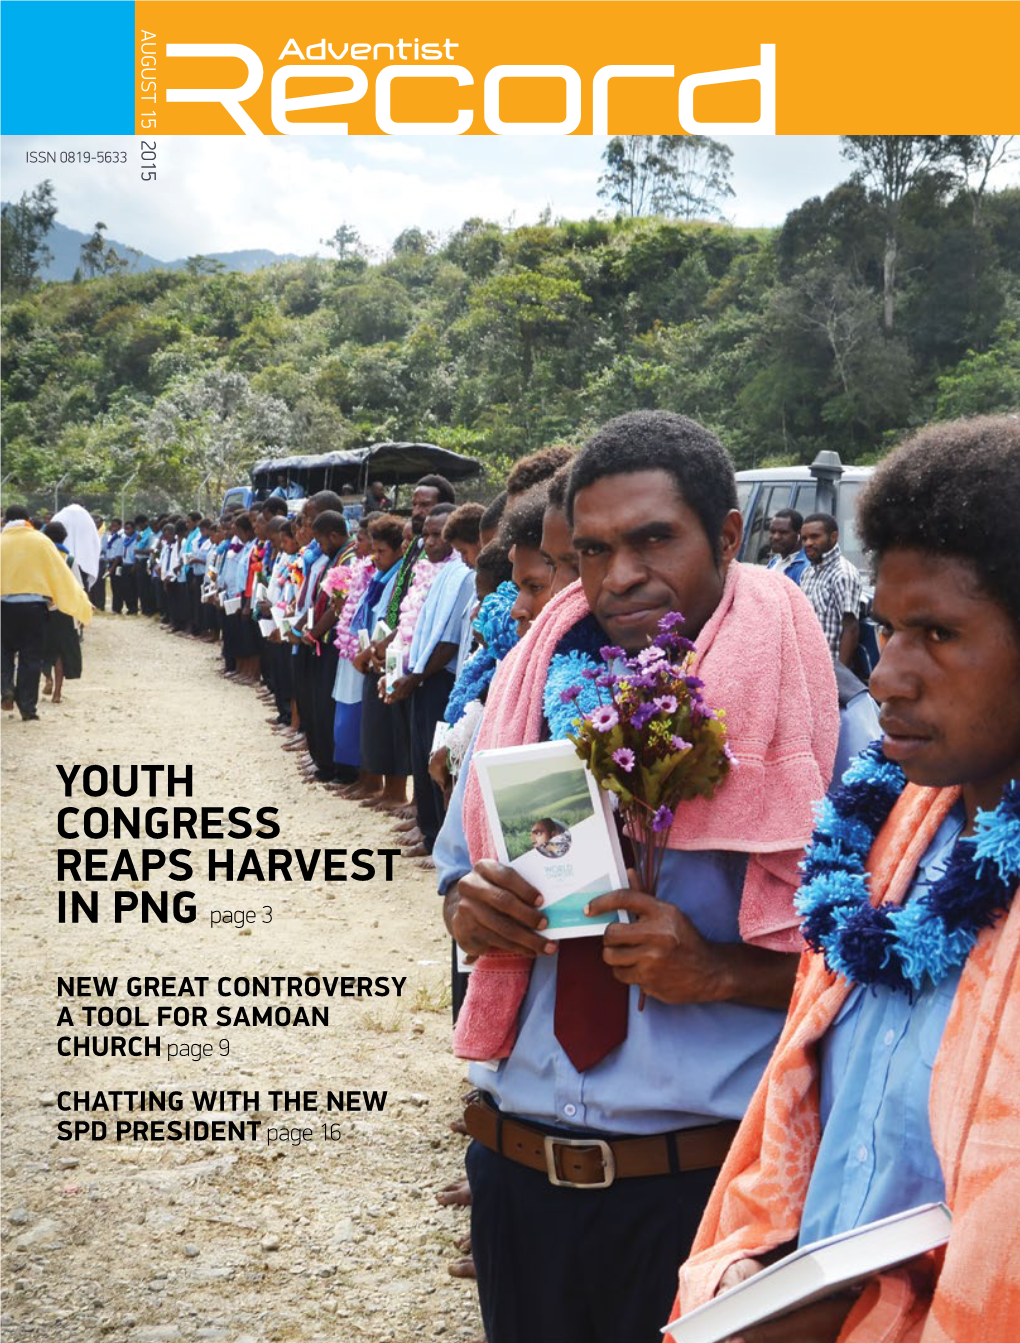 YOUTH CONGRESS REAPS HARVEST in PNG Page 3